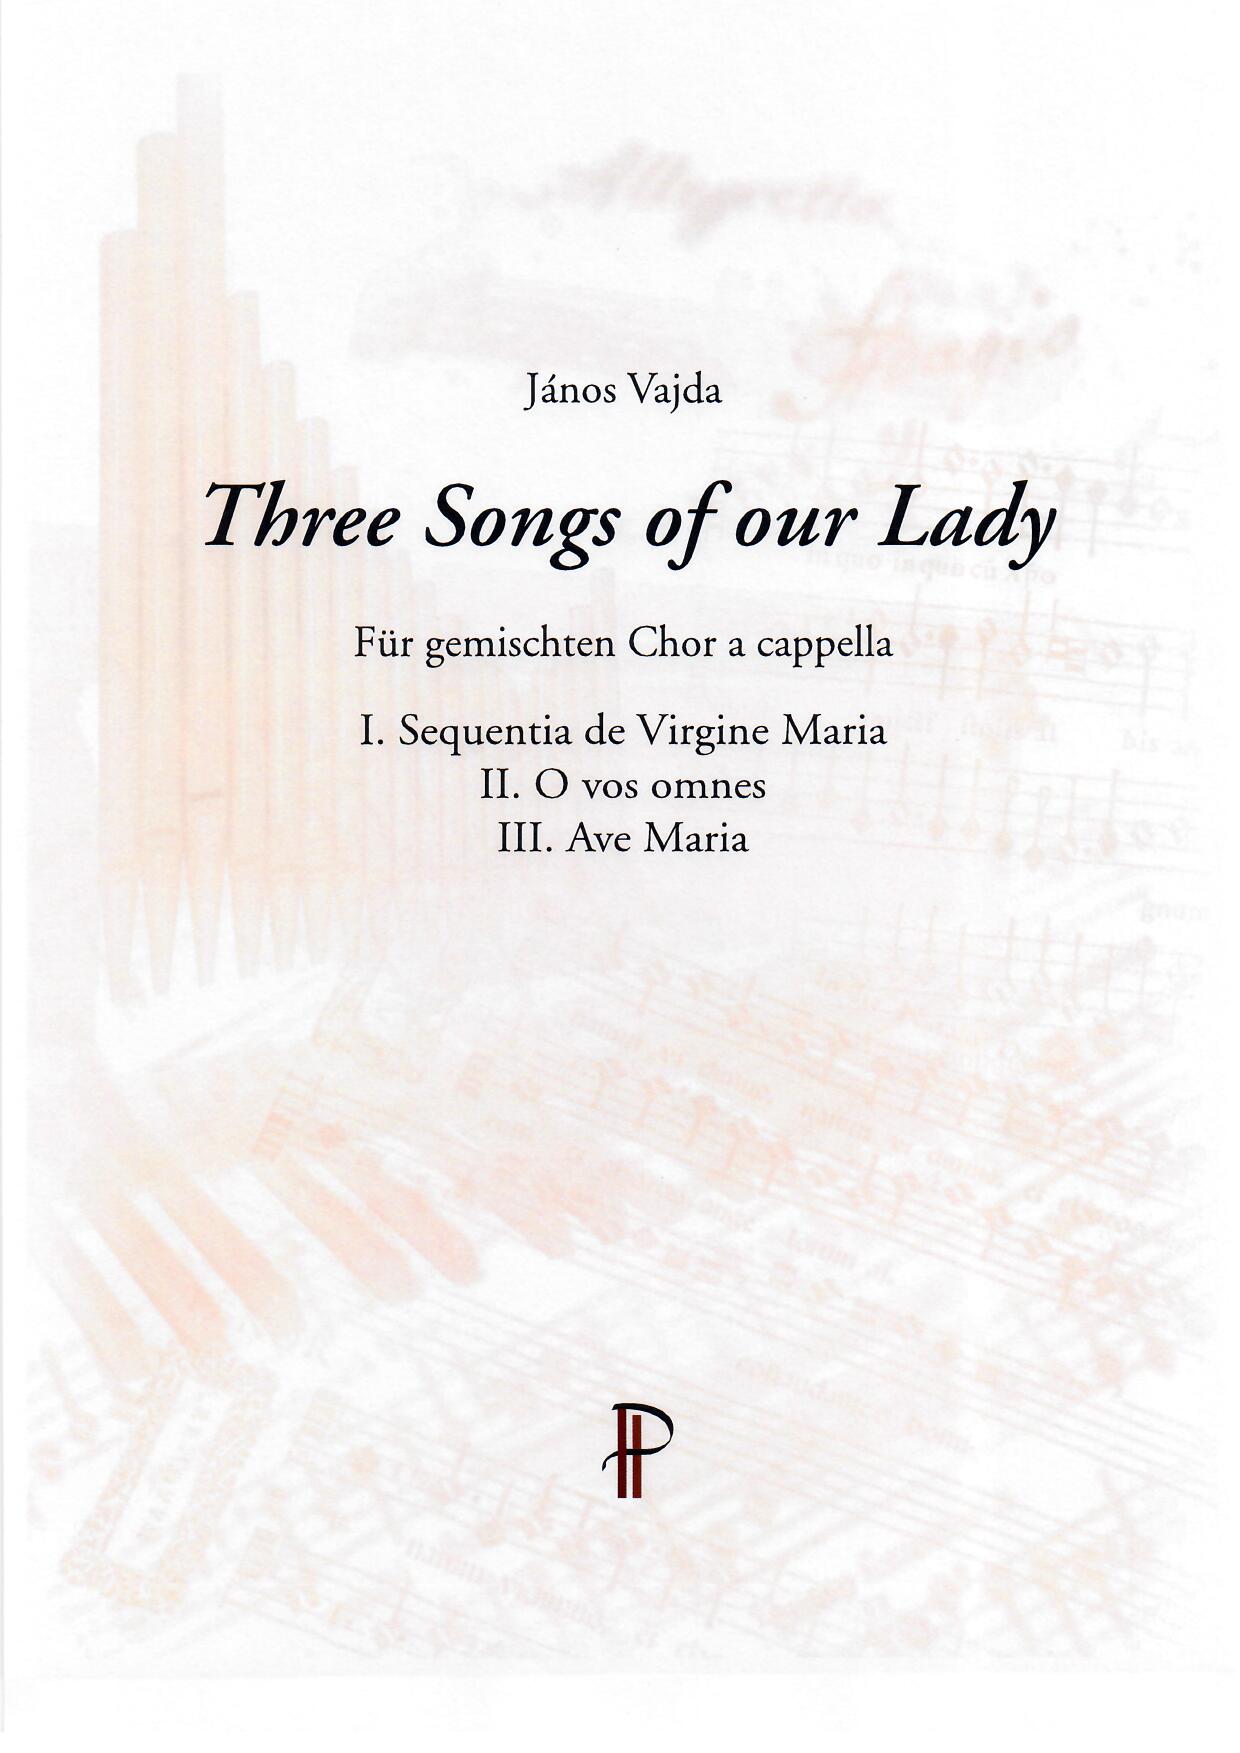 Three Songs of our Lady - Show sample score